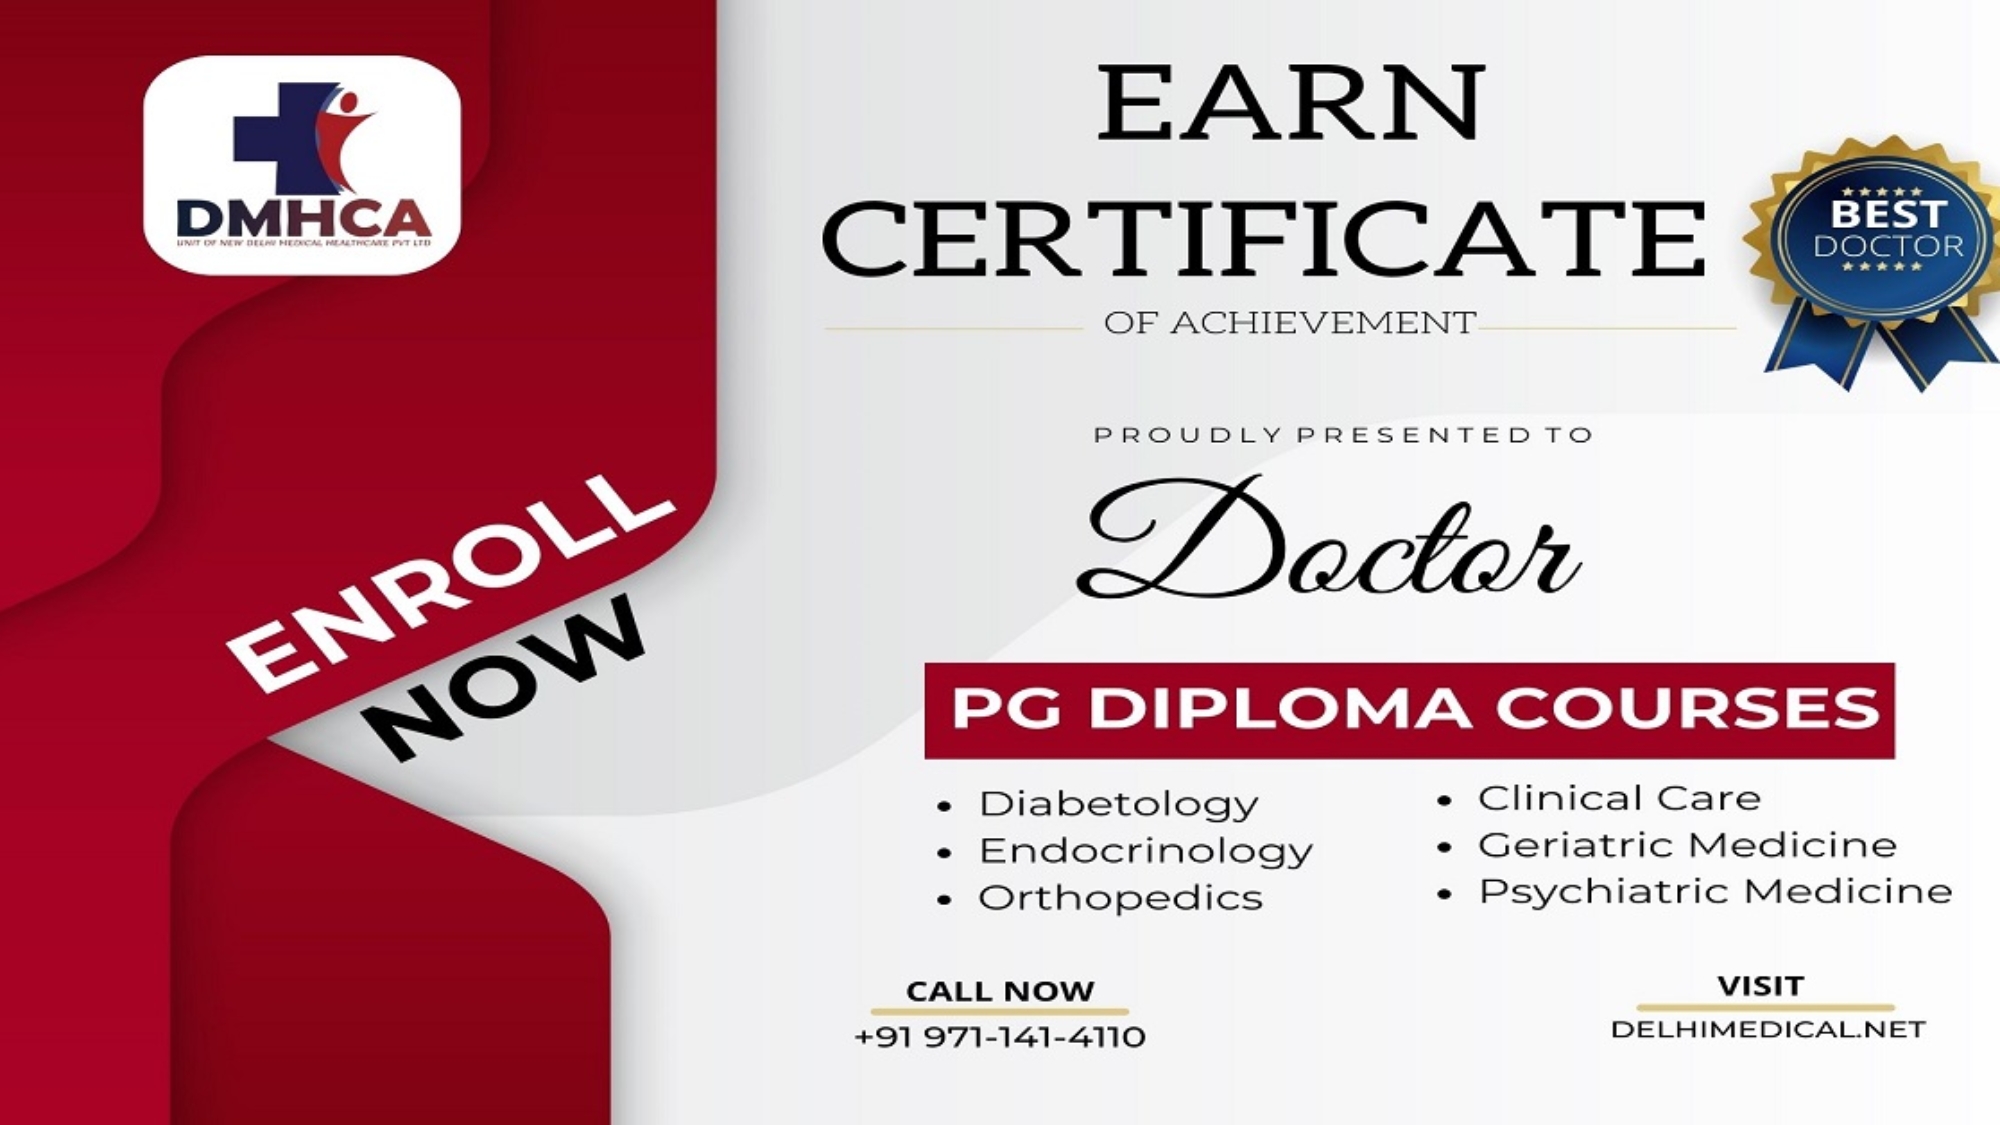 PG DIploma Courses for Doctors (After MBBS / MD / MS)